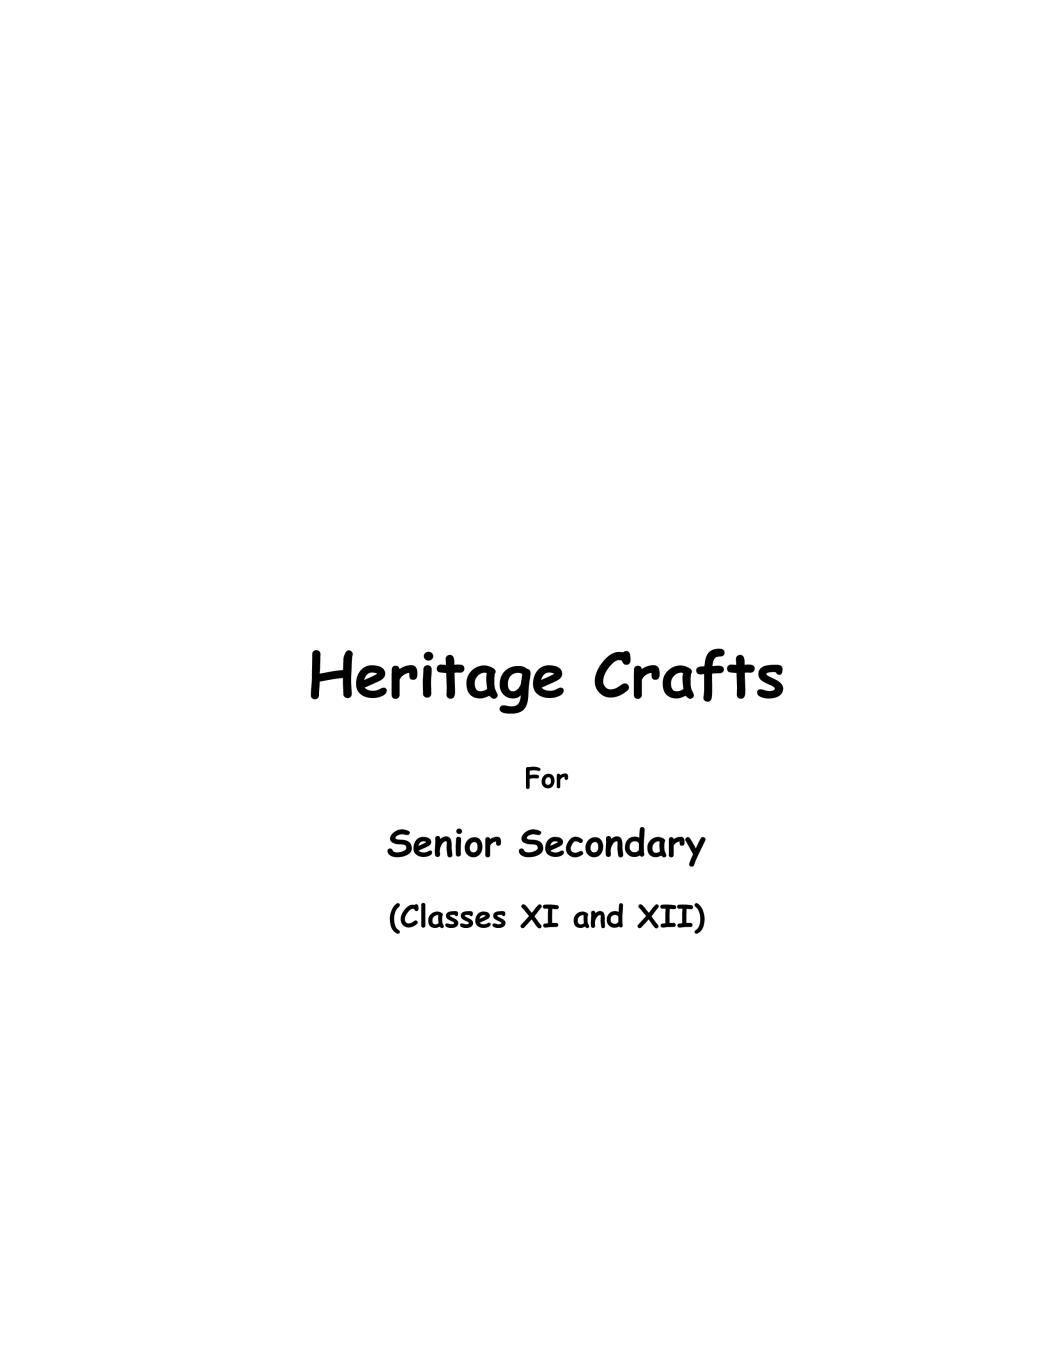 NCERT Class 12 Syllabus for Heritage Craft - Page 1